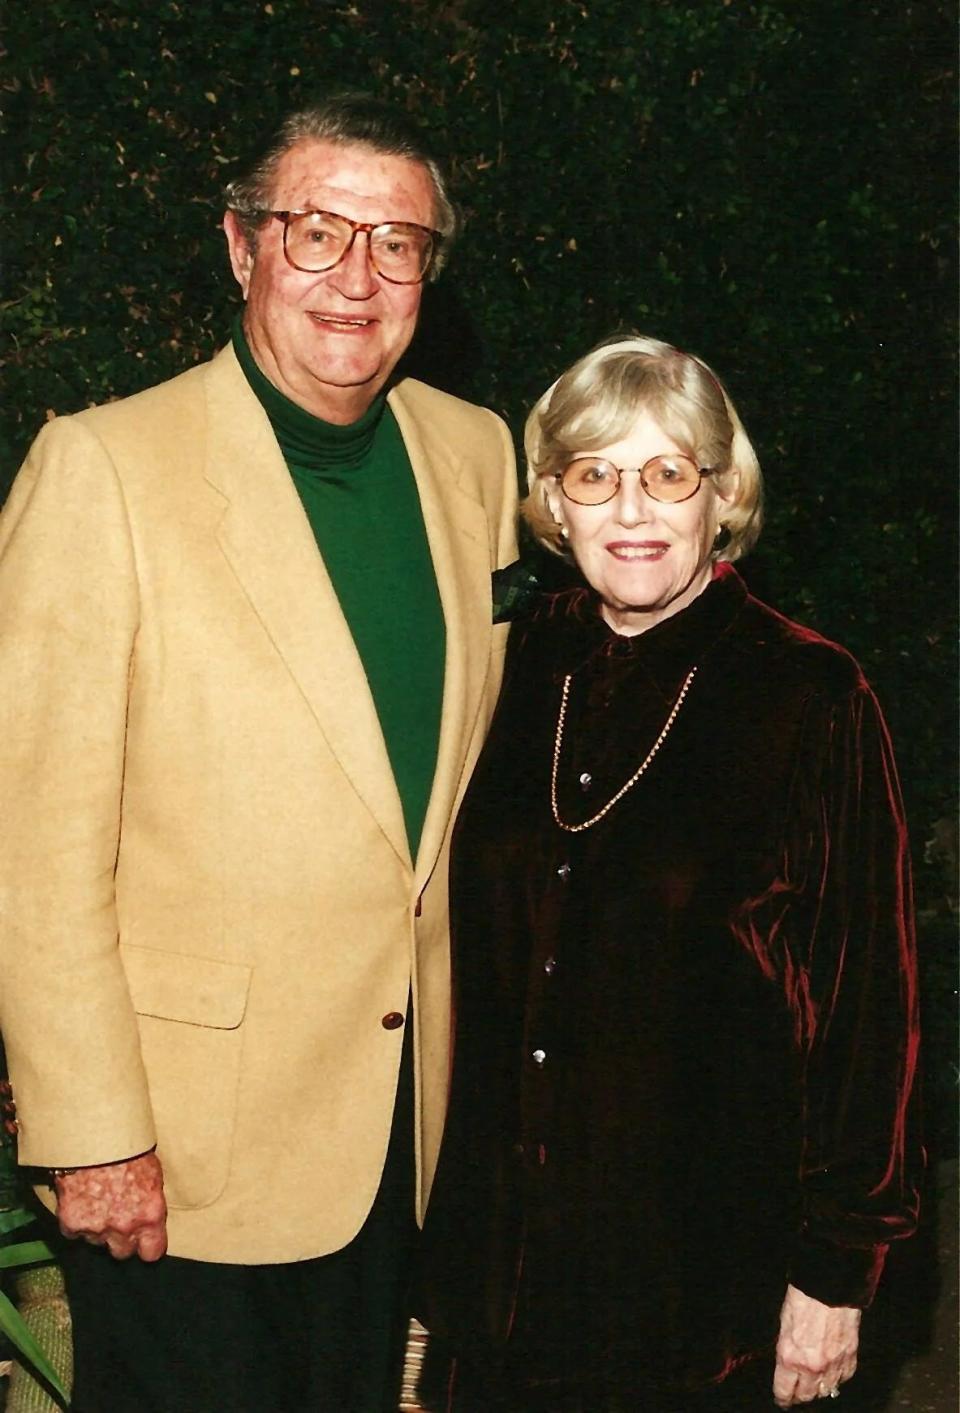 Rozene and Ric Supple were the owners of RR Broadcasting and The Camelot Theatres in Palm Springs.